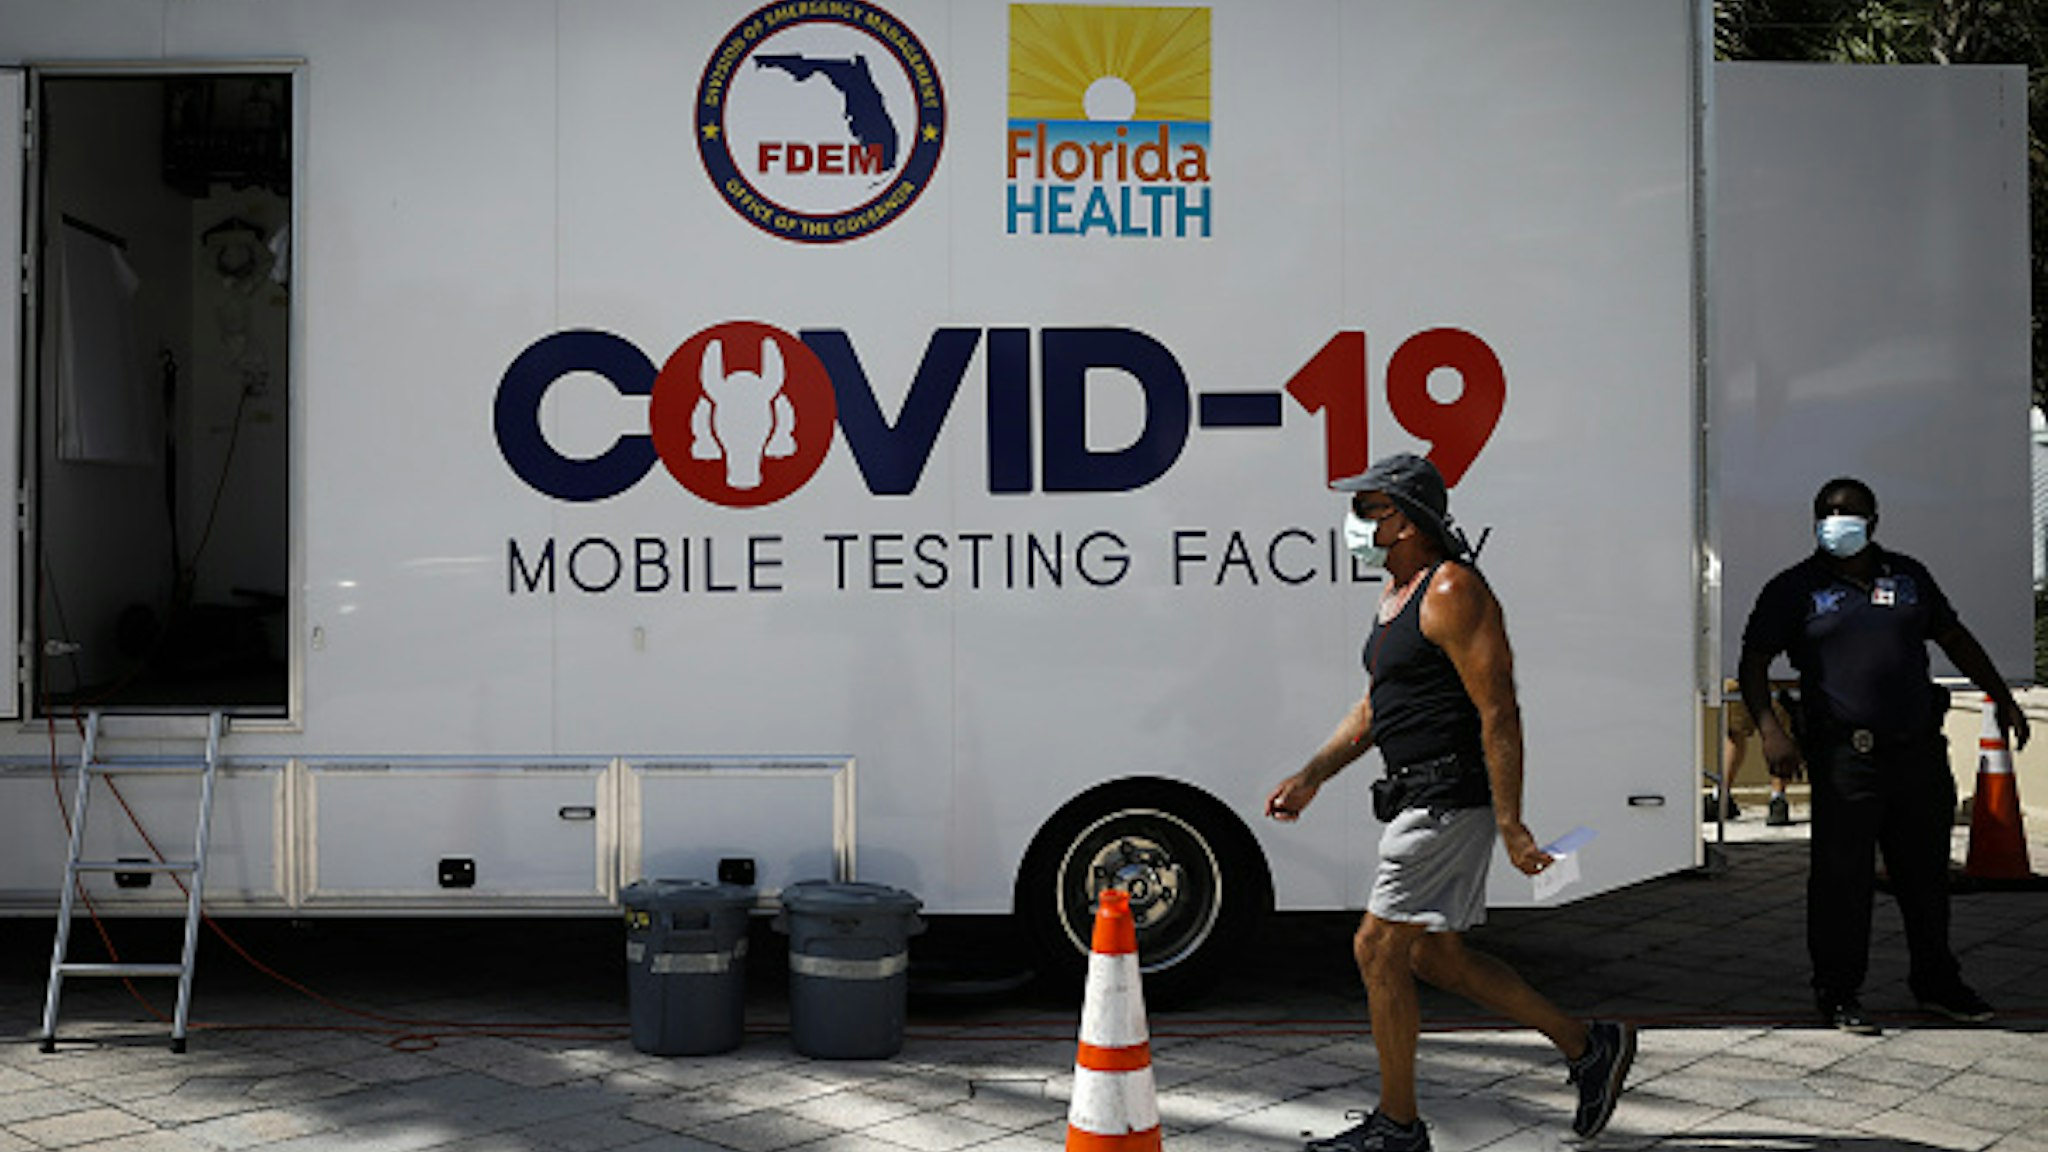 FLORIDA, USA - JULY 24: A man walks in front of a mobile COVID-19 testing facility, in Miami Beach, Florida, United States on July 24, 2020.